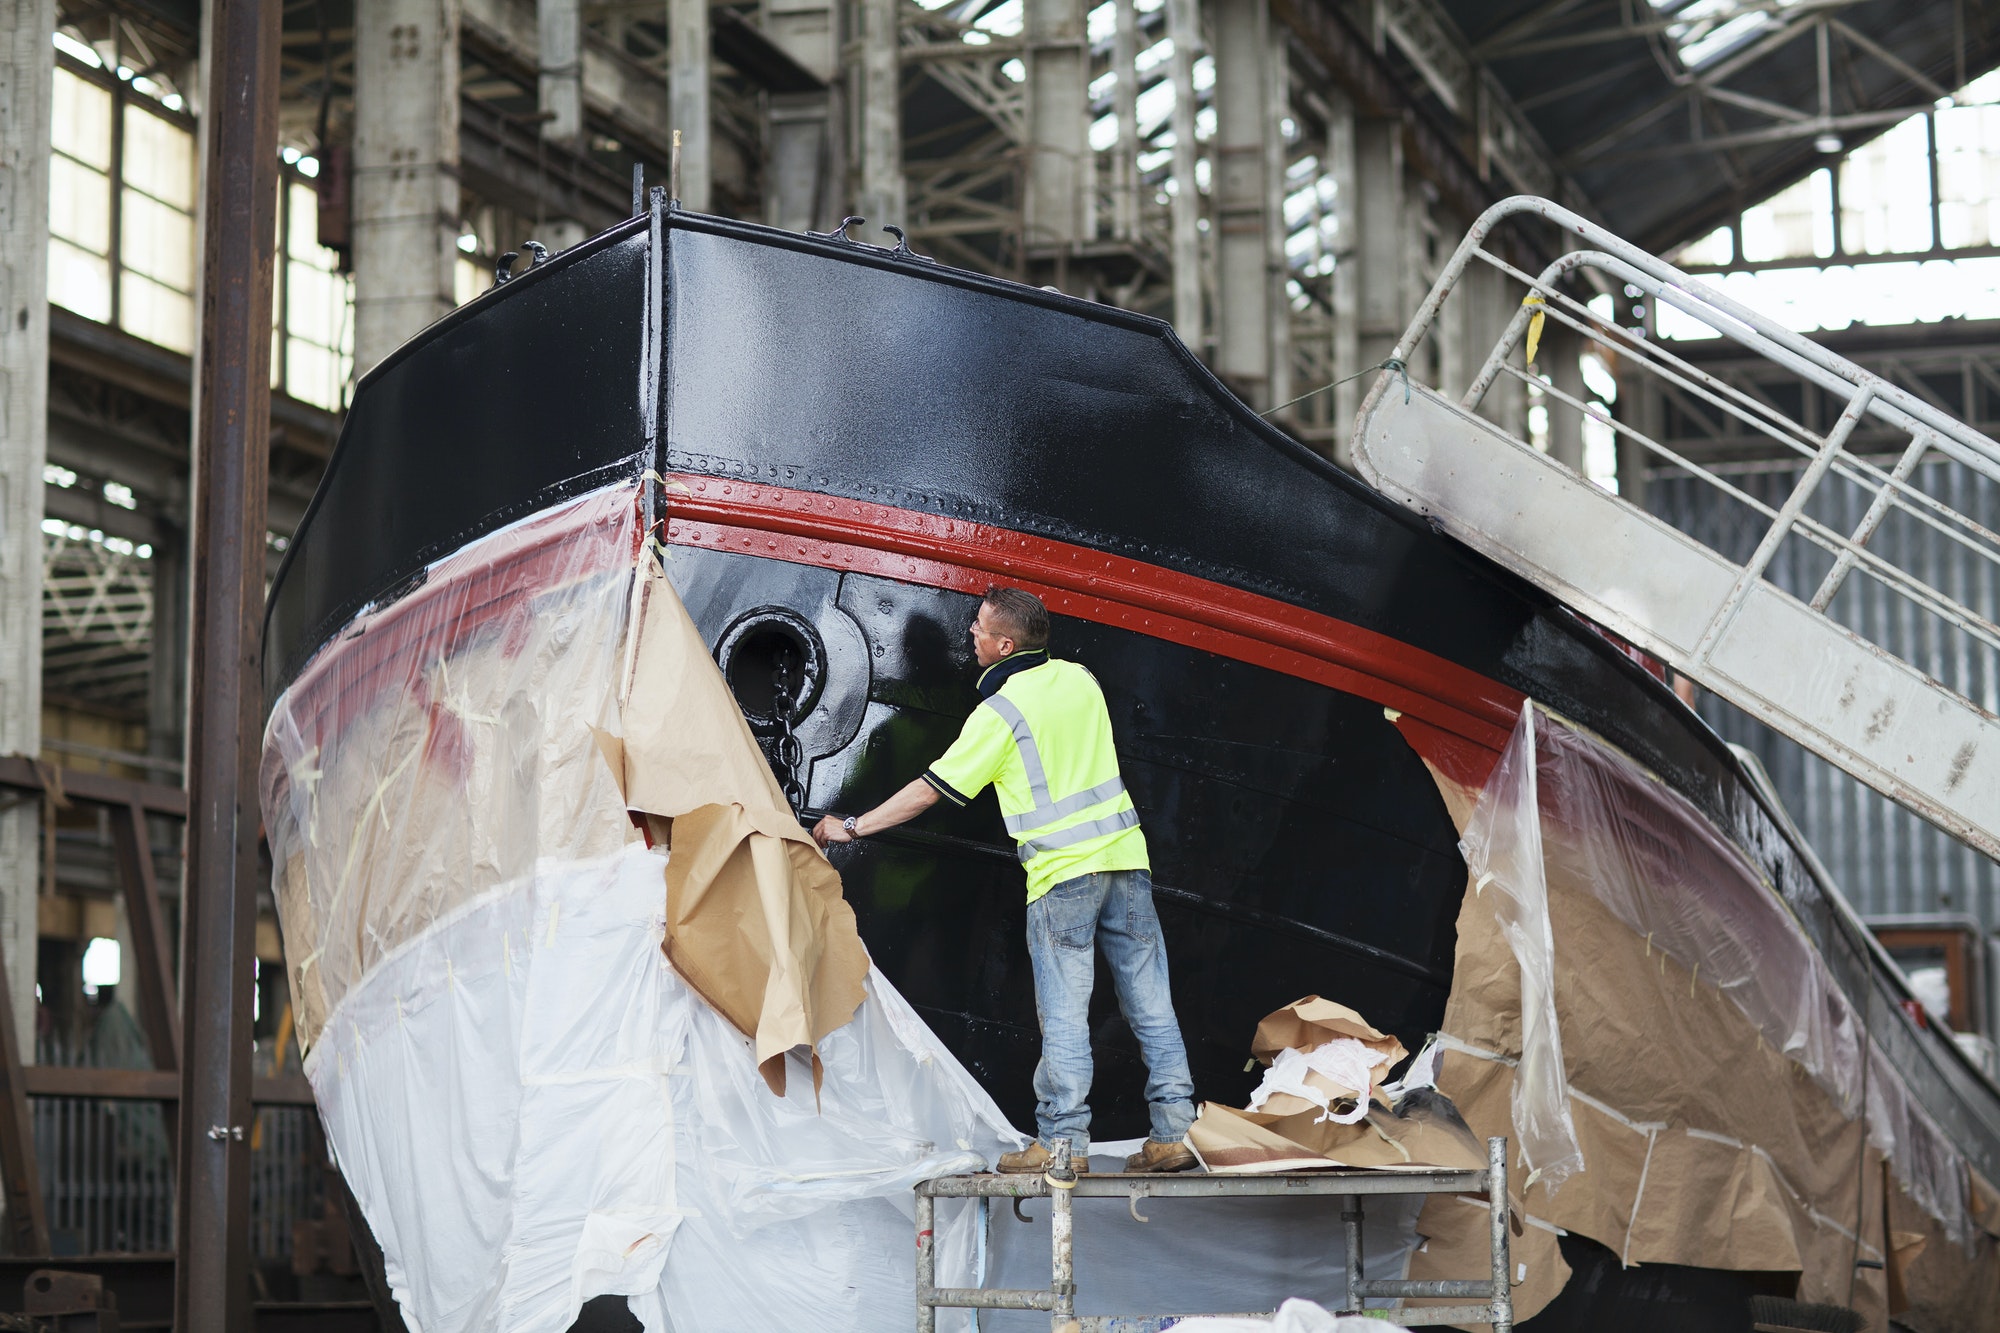 Workers unwrapping boat in shipyard